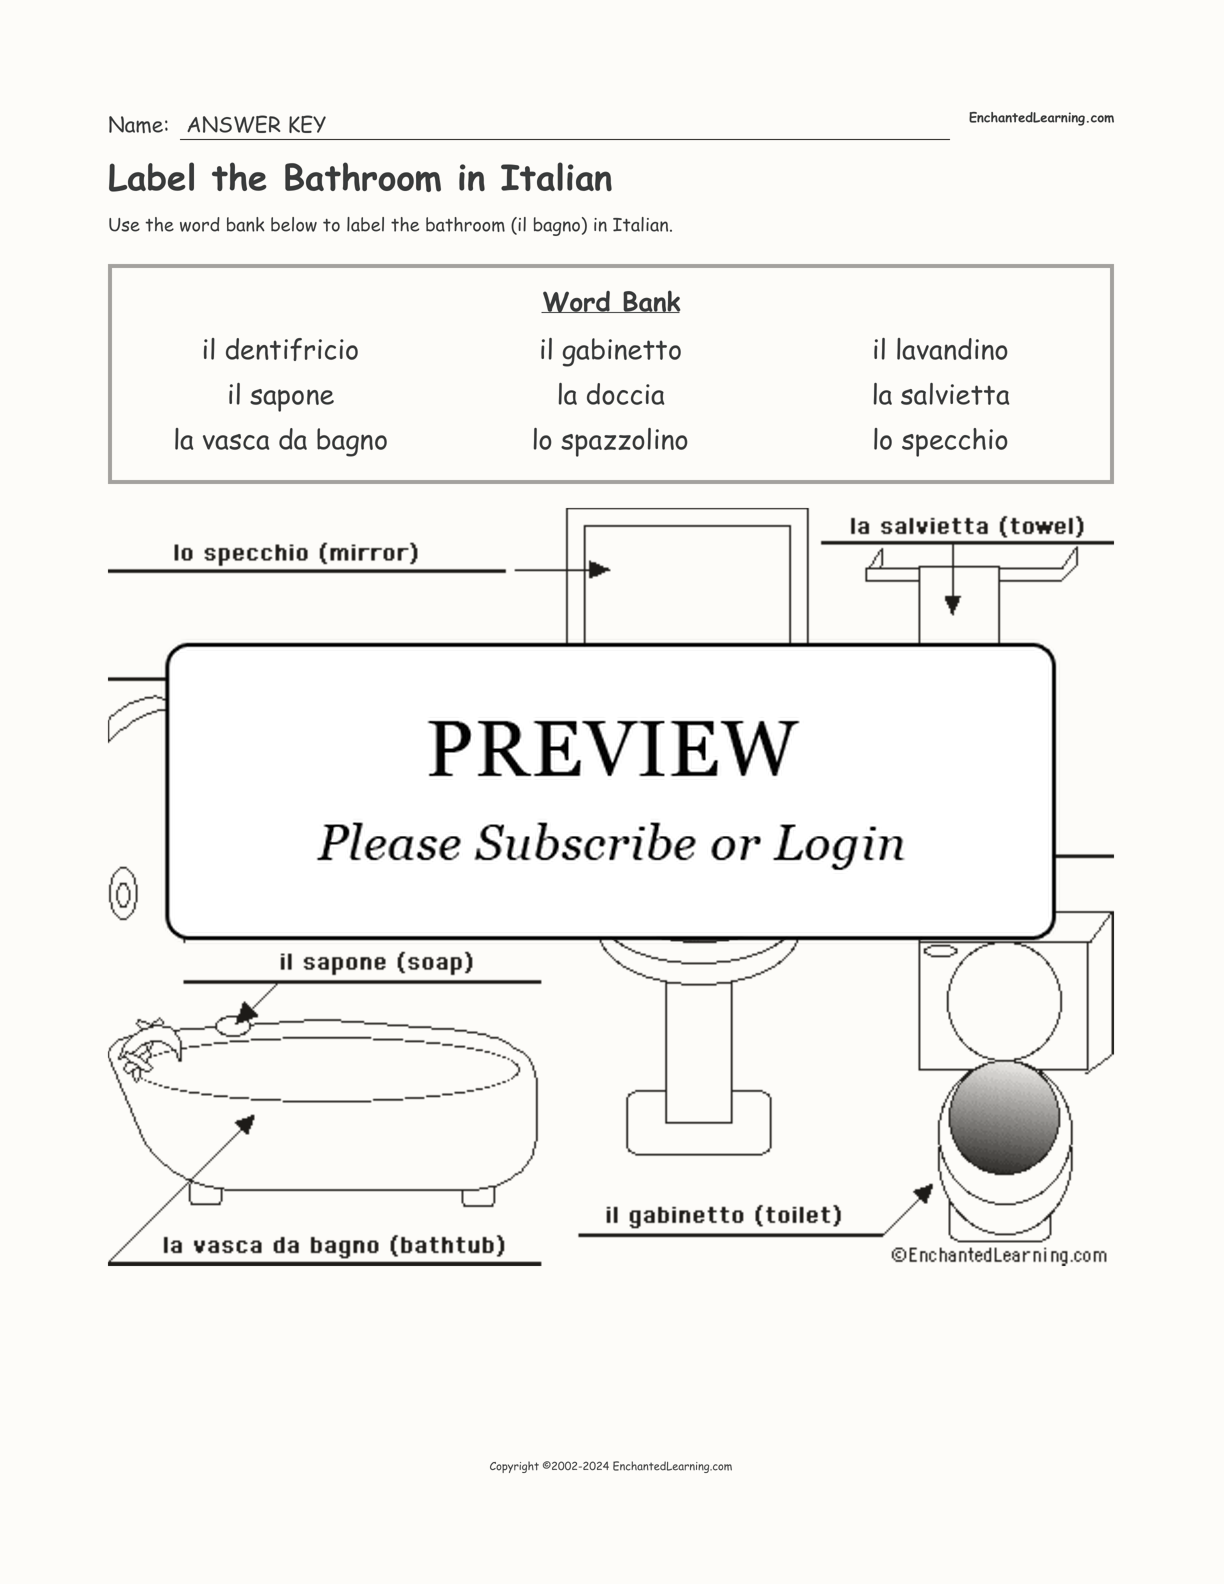 Label the Bathroom in Italian interactive worksheet page 2